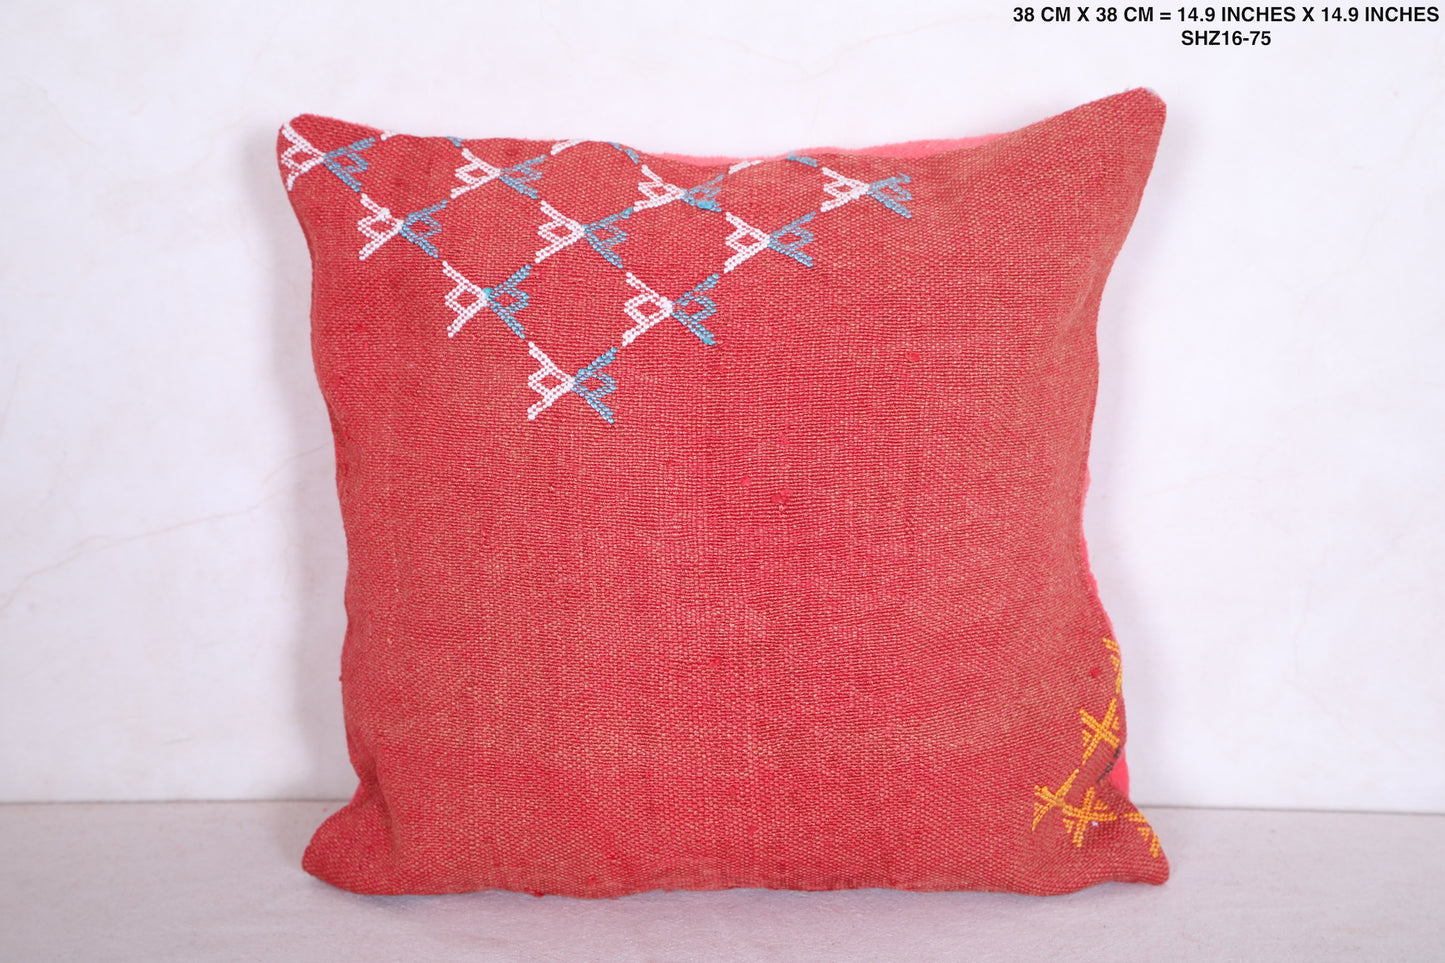 Moroccan handmade kilim pillow 14.9 INCHES X 14.9 INCHES